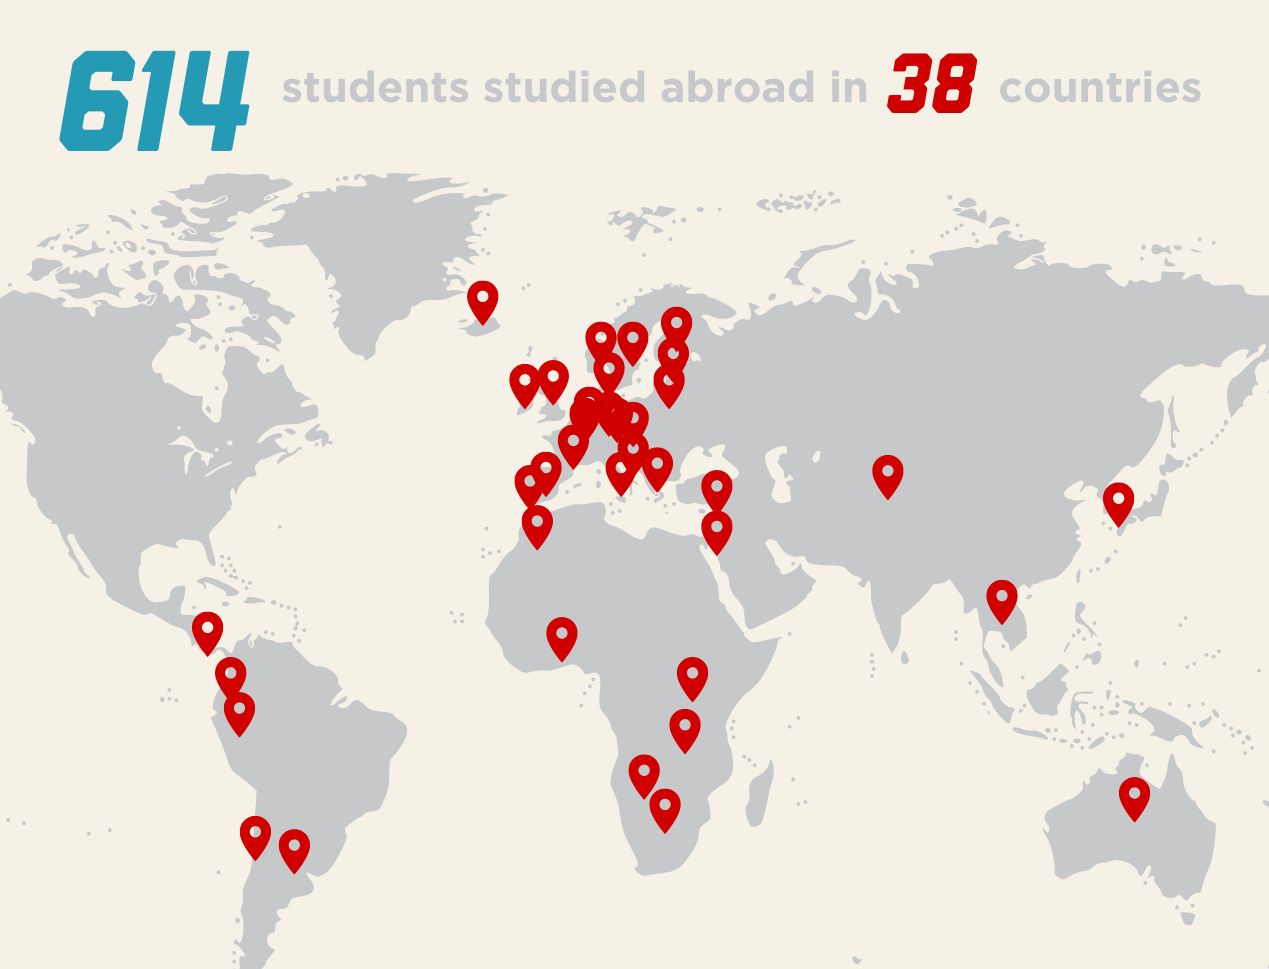 Graphic of world map with location pins in 38 countries and text that reads 614 students studied abroad in 38 countries